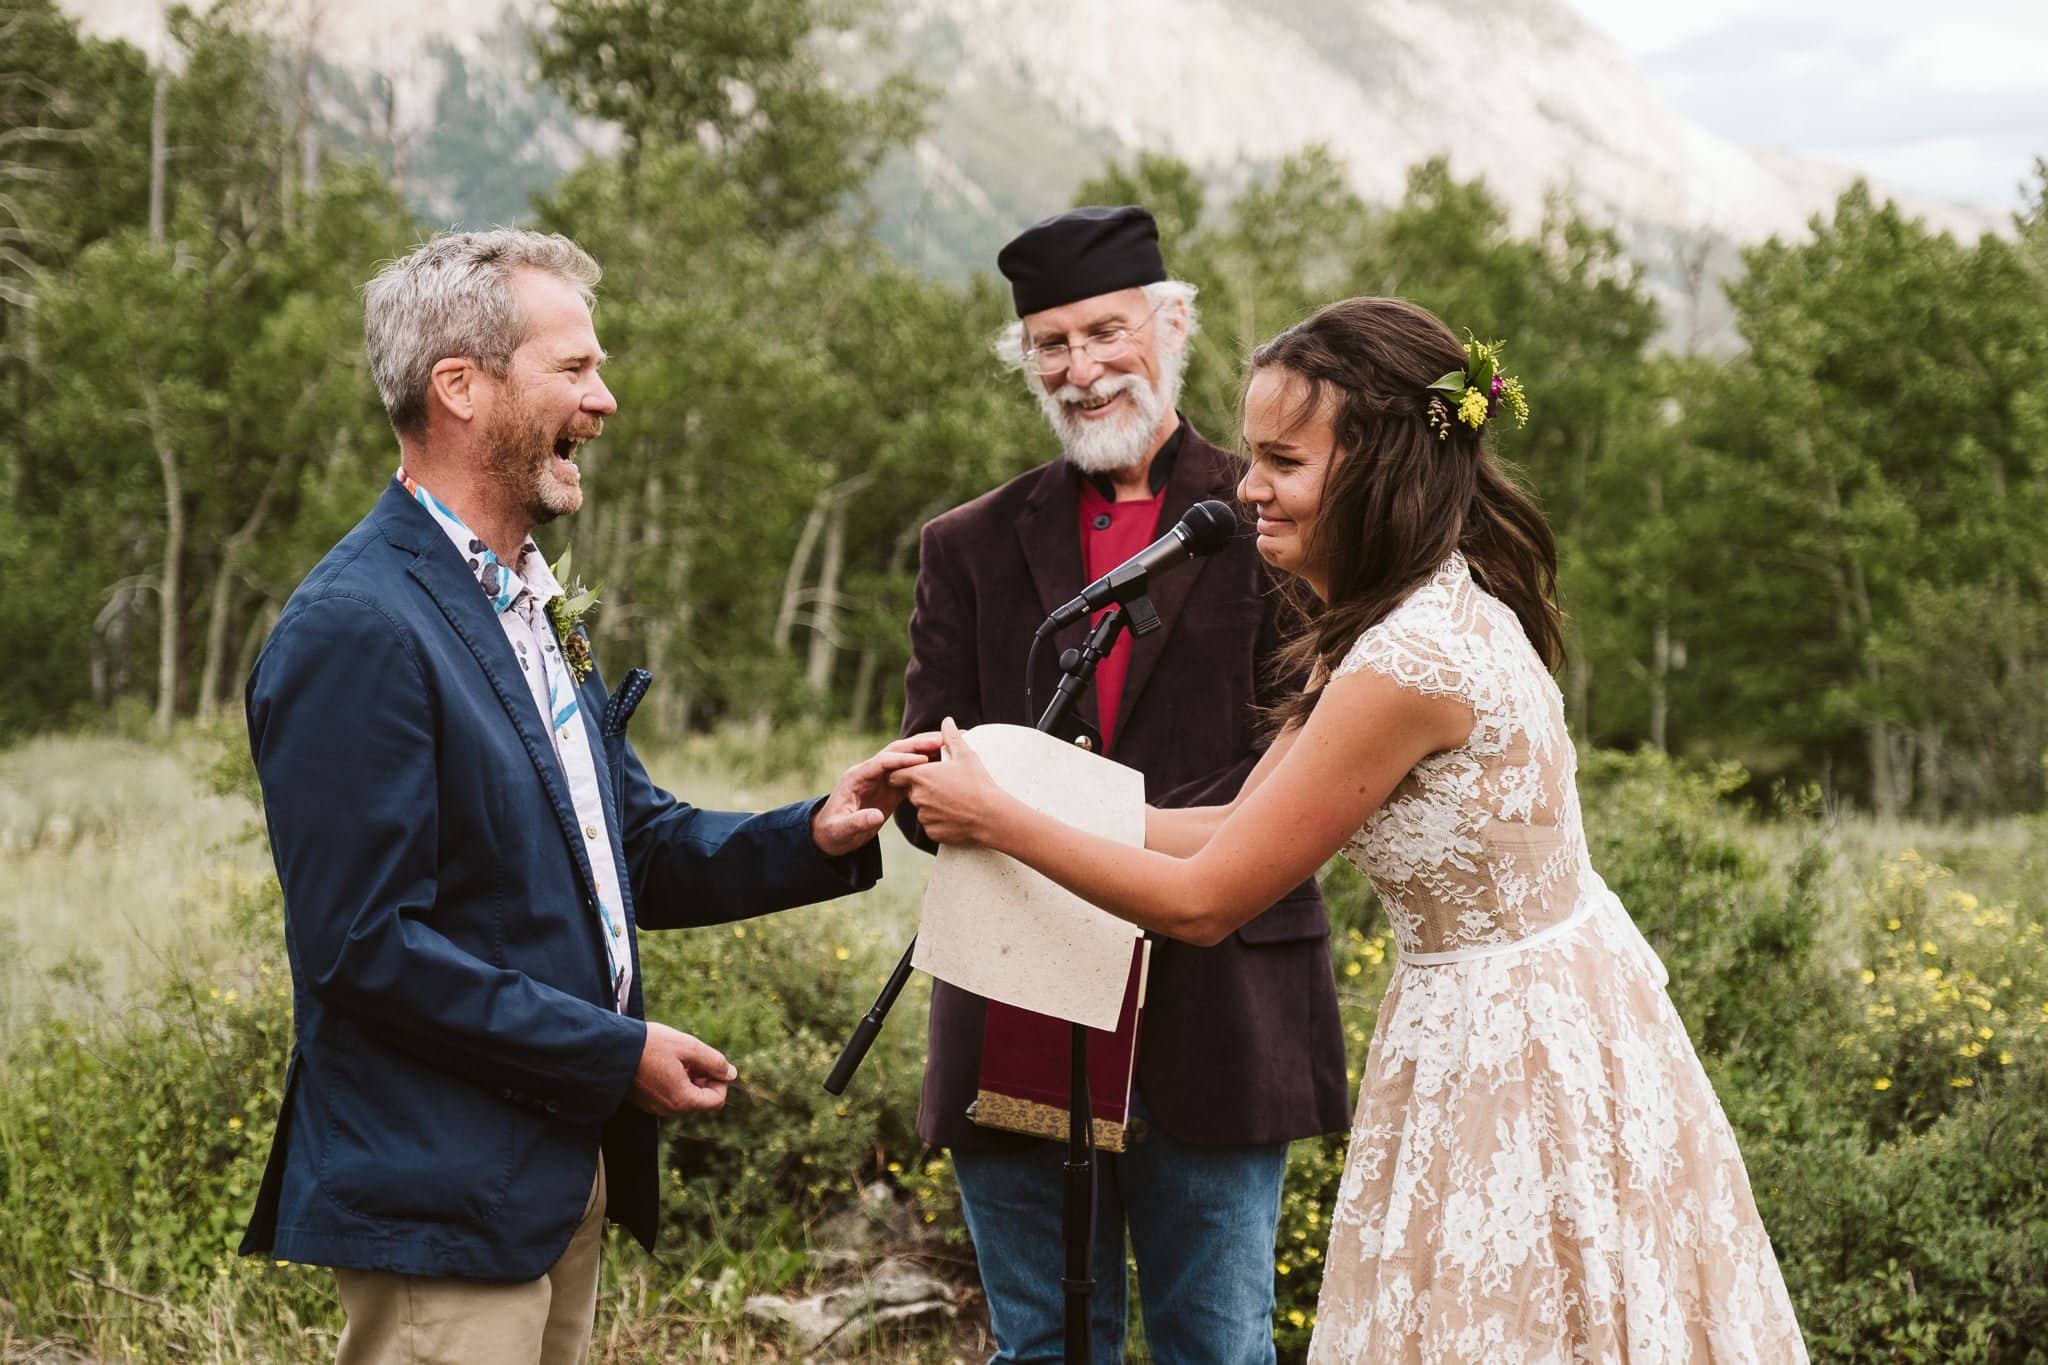 Woods Walk wedding ceremony in Crested Butte, Colorado wedding photographer